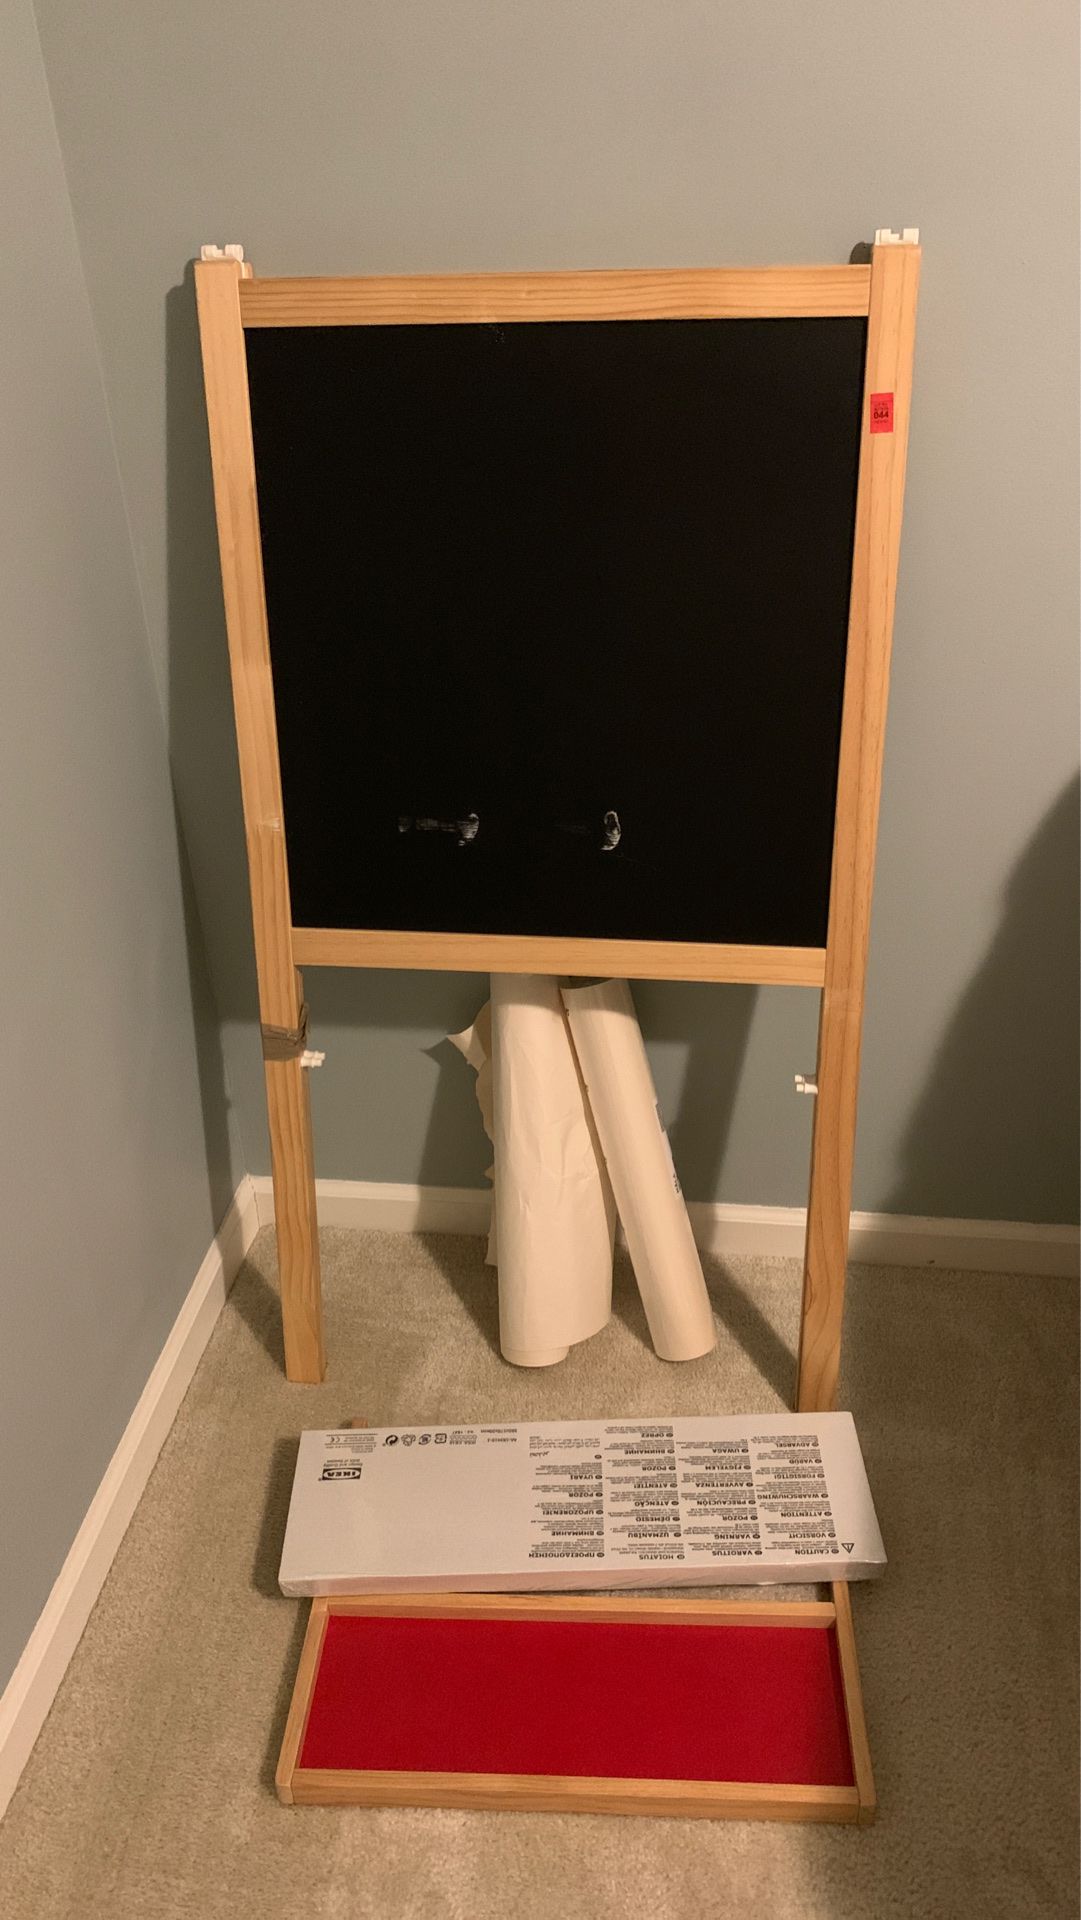 Easel from IKea